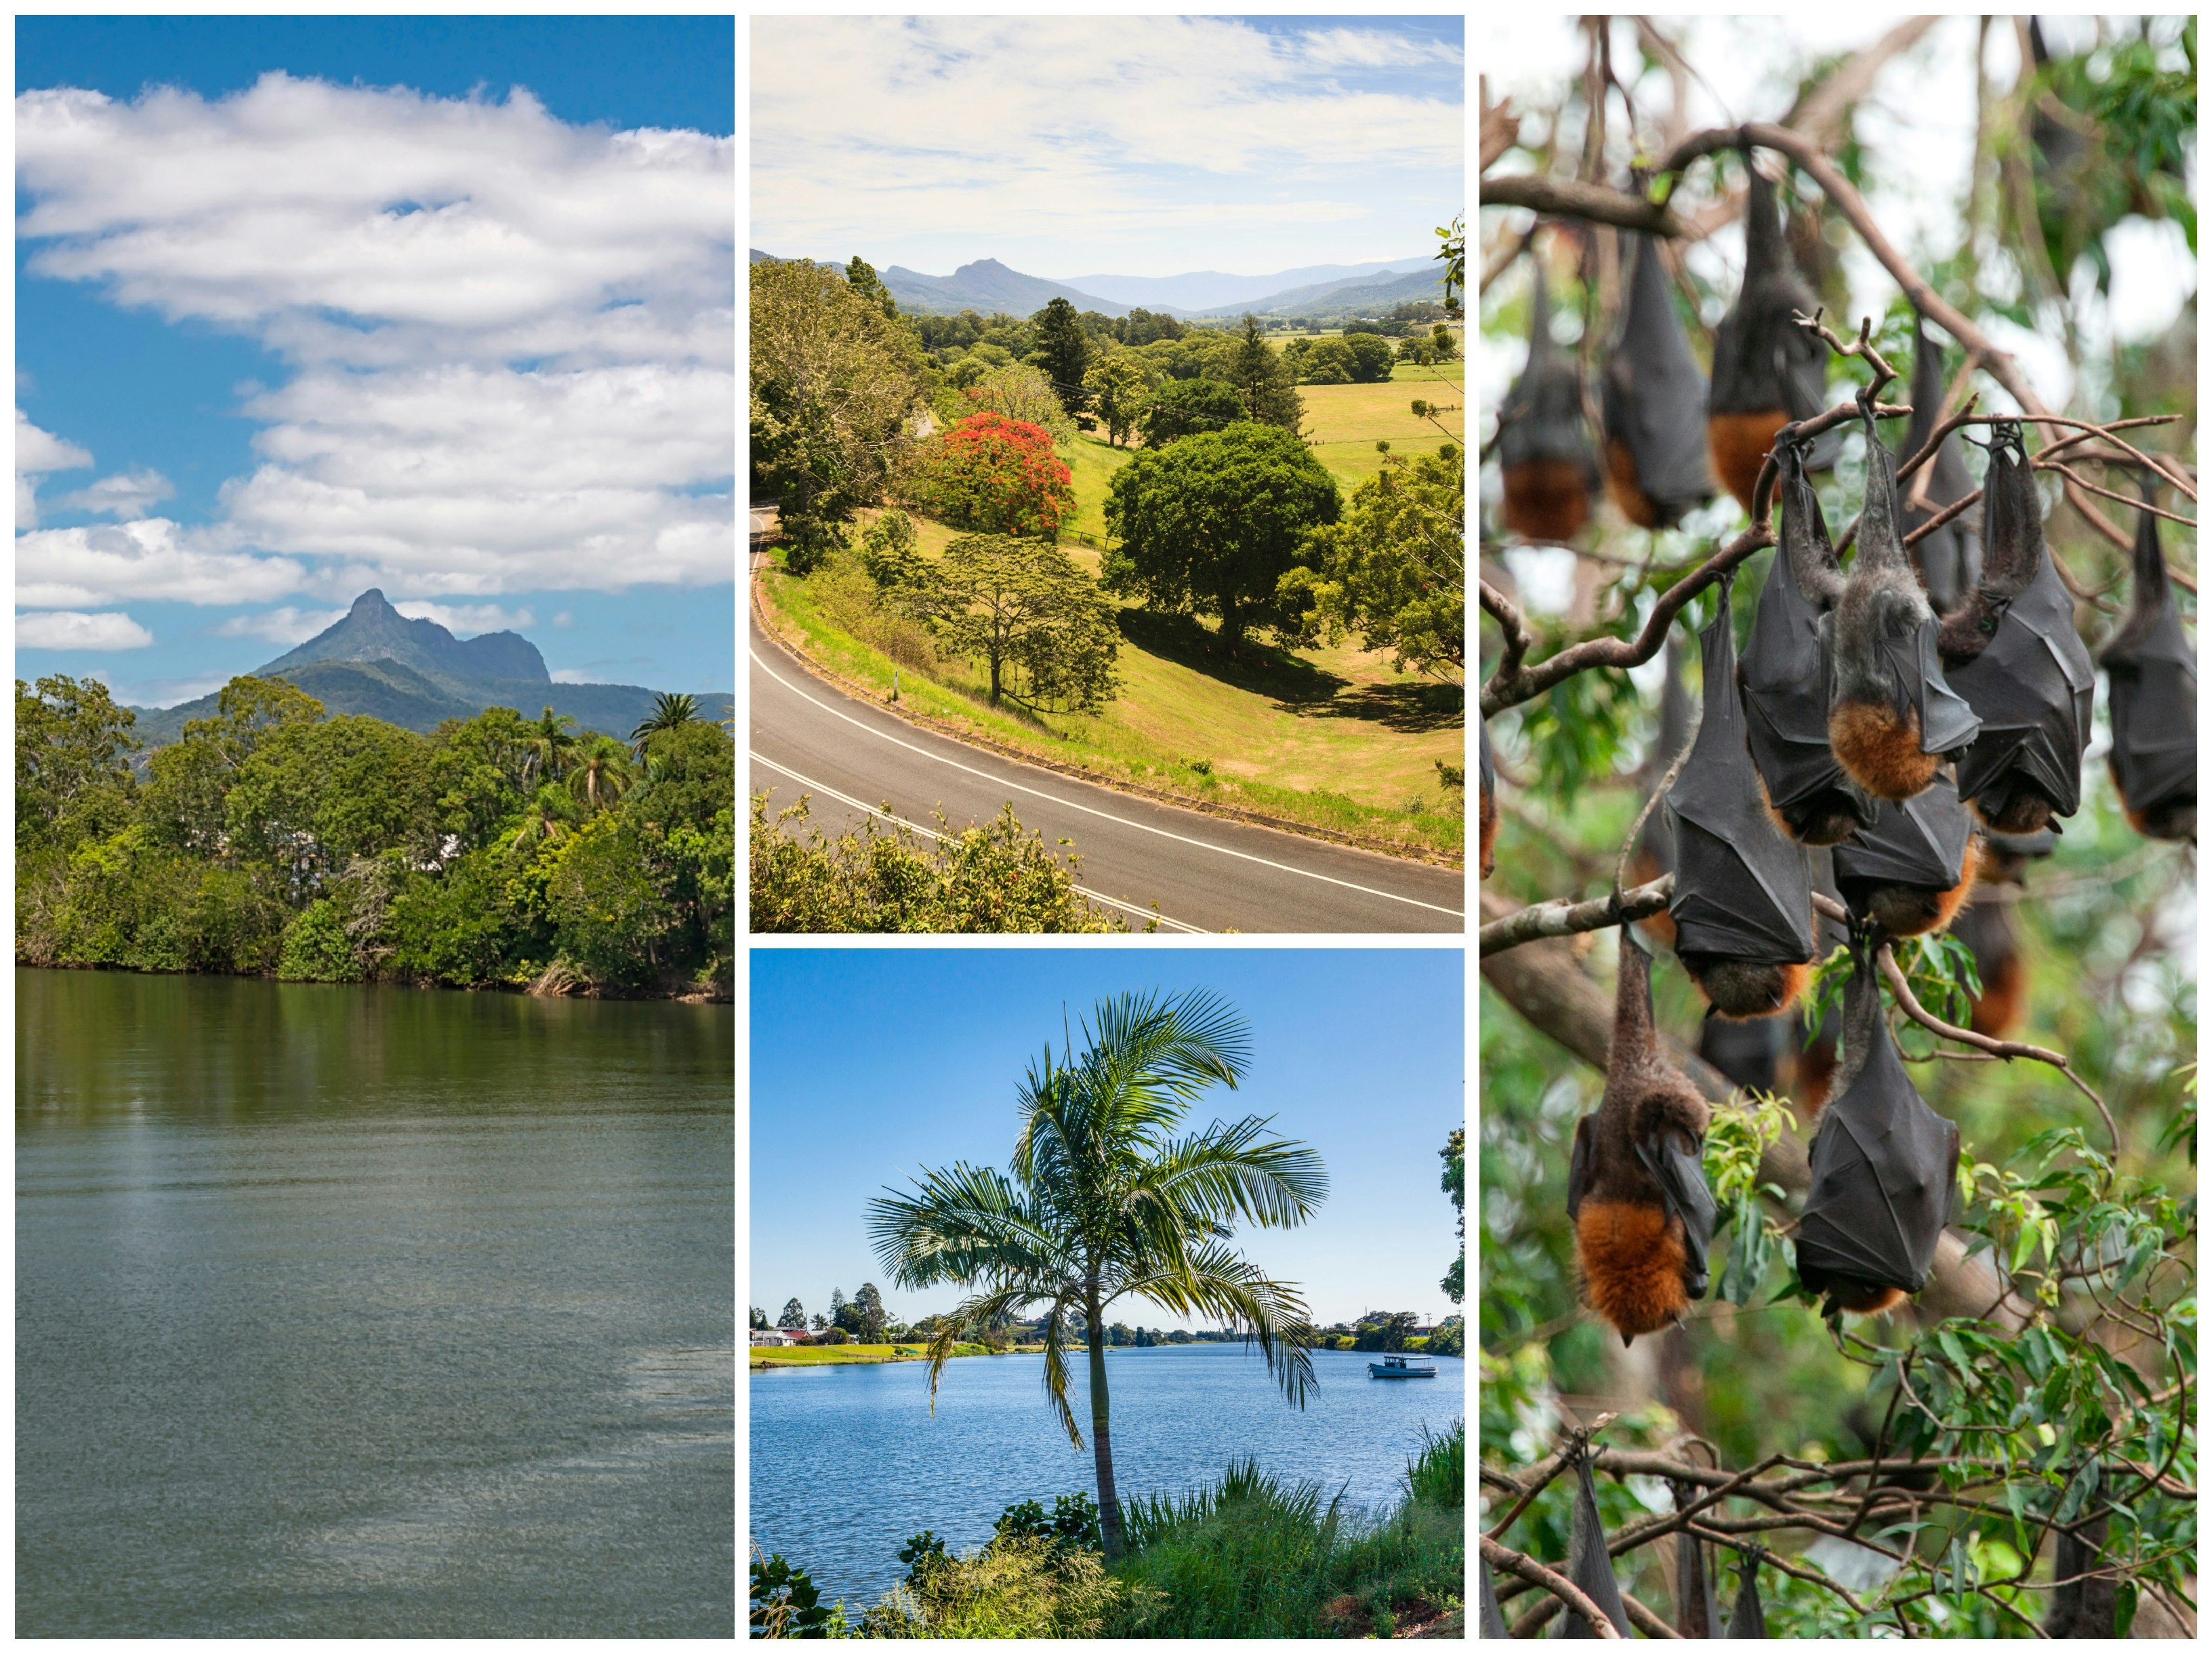 Shots of bats sleeping upside down and images of lakes and lush, country roads in the Tweed, NSW